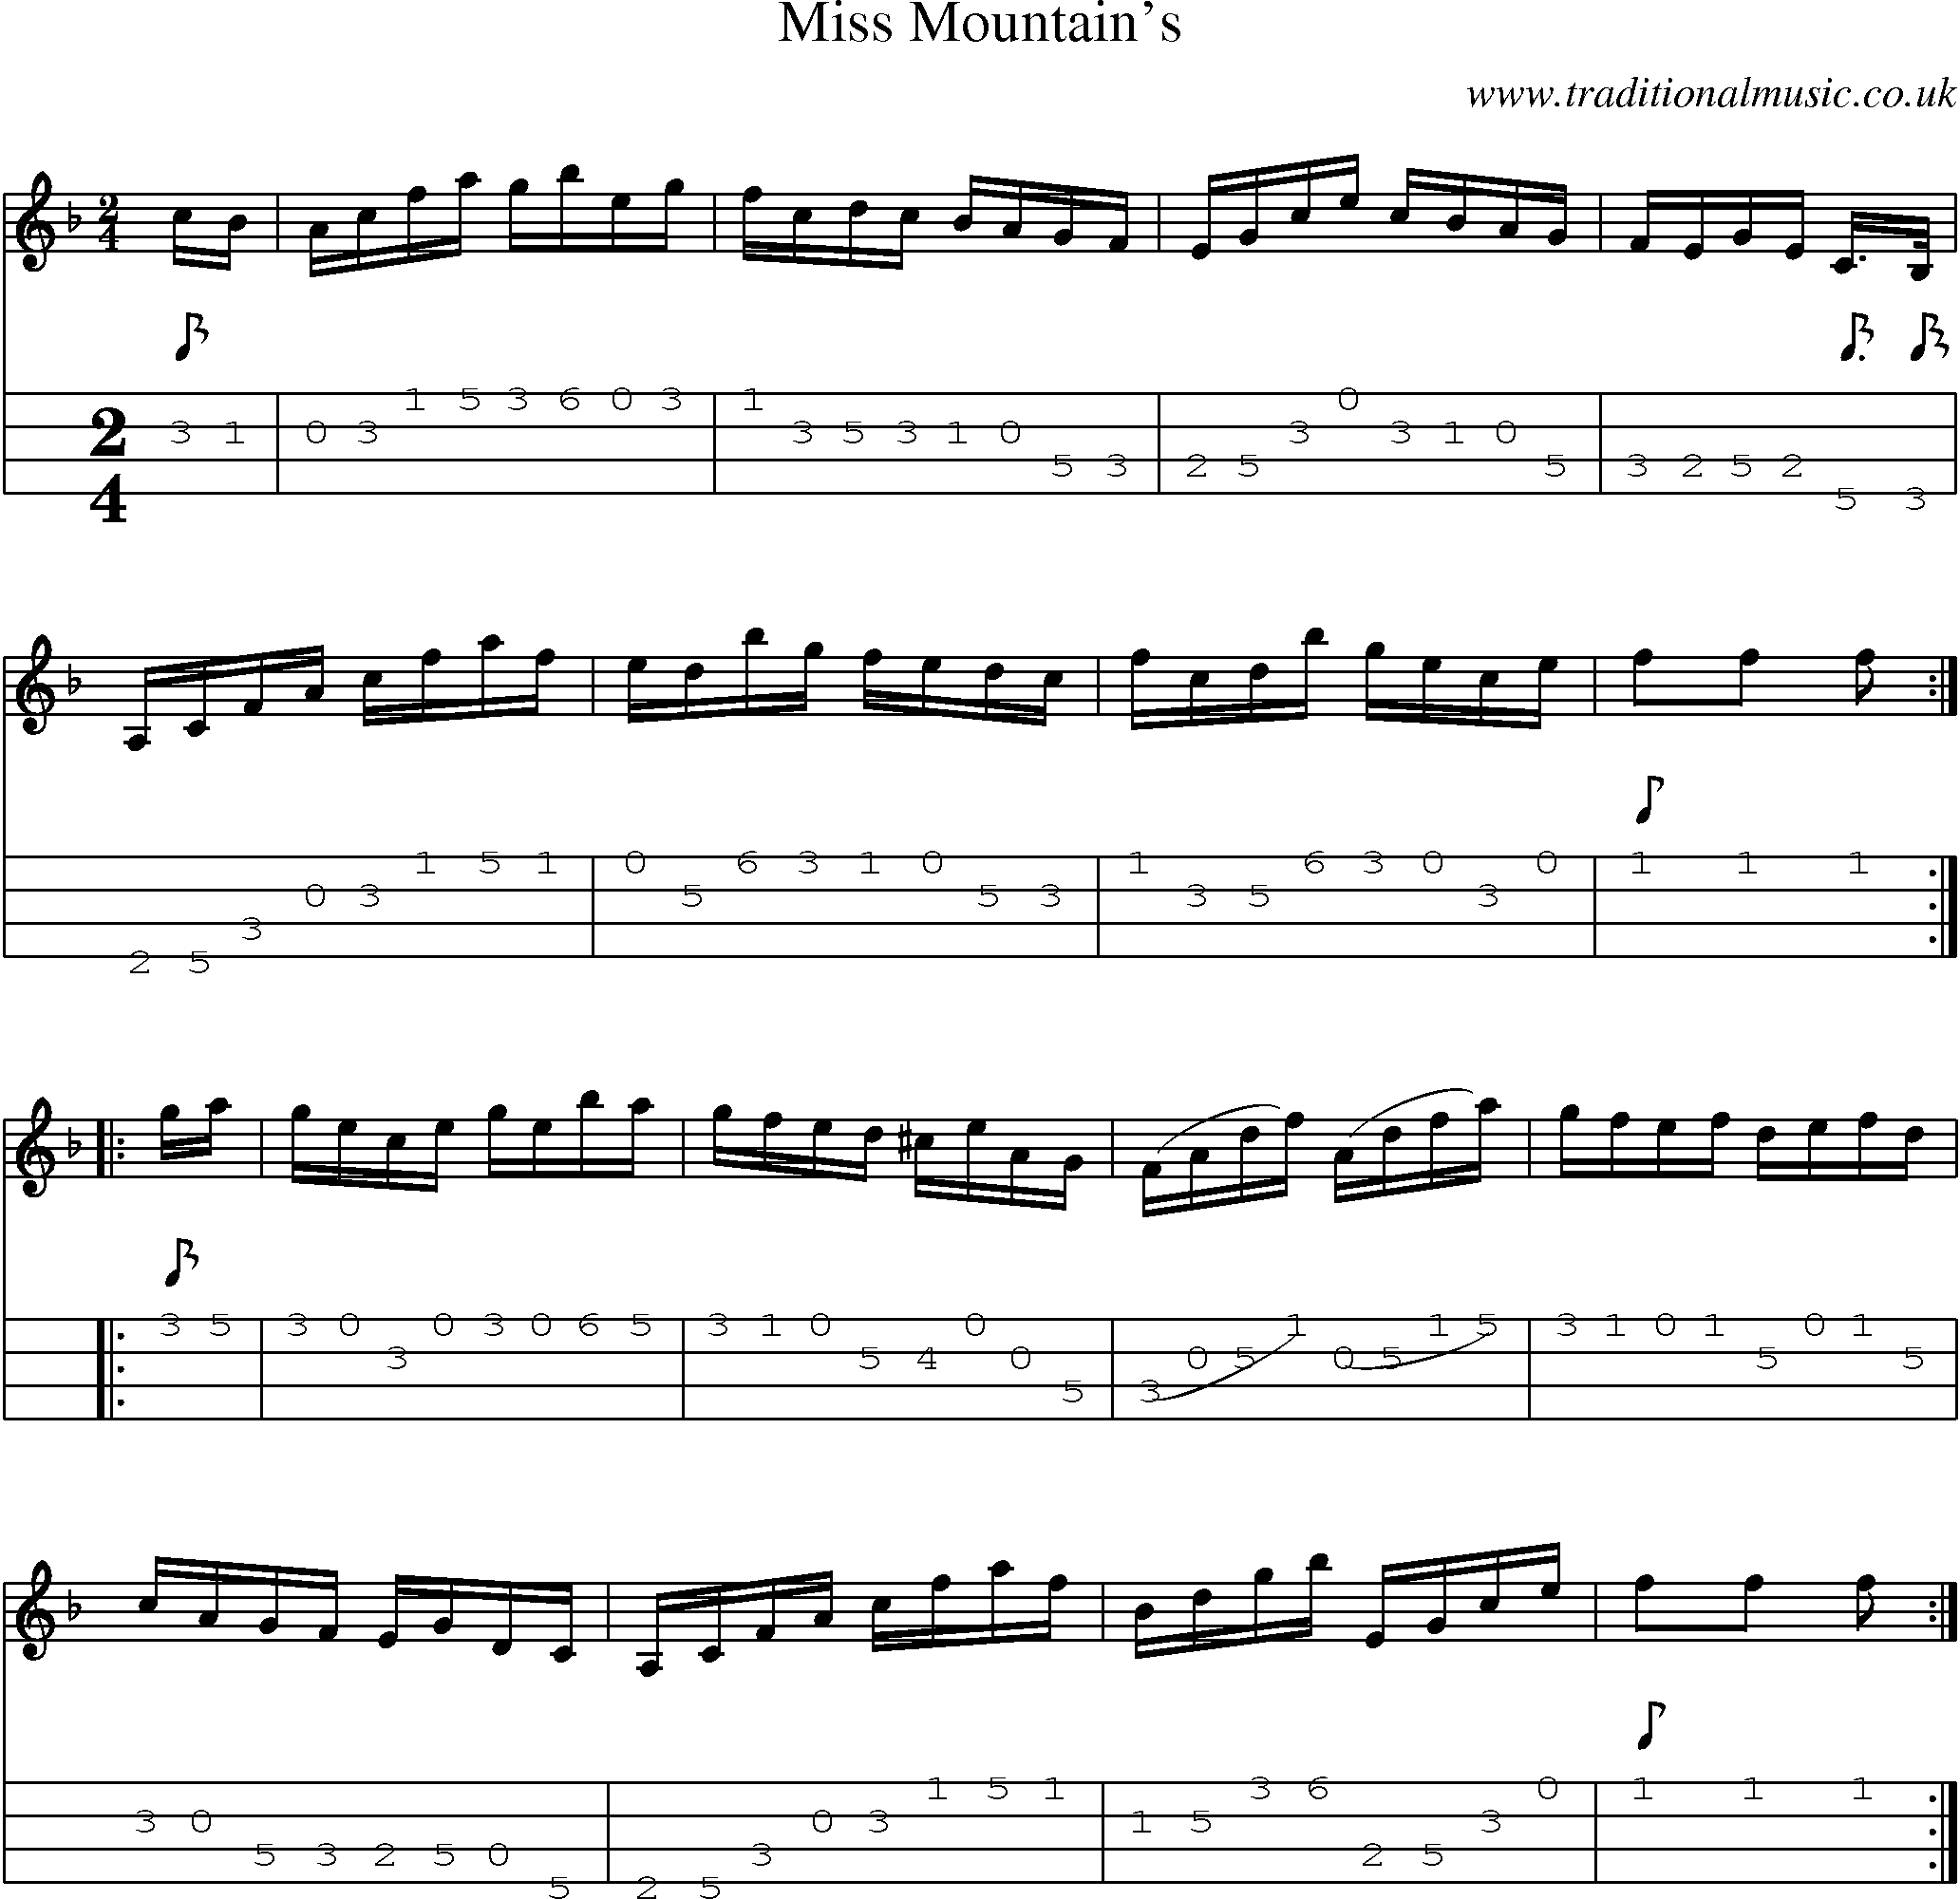 Music Score and Mandolin Tabs for Miss Mountains